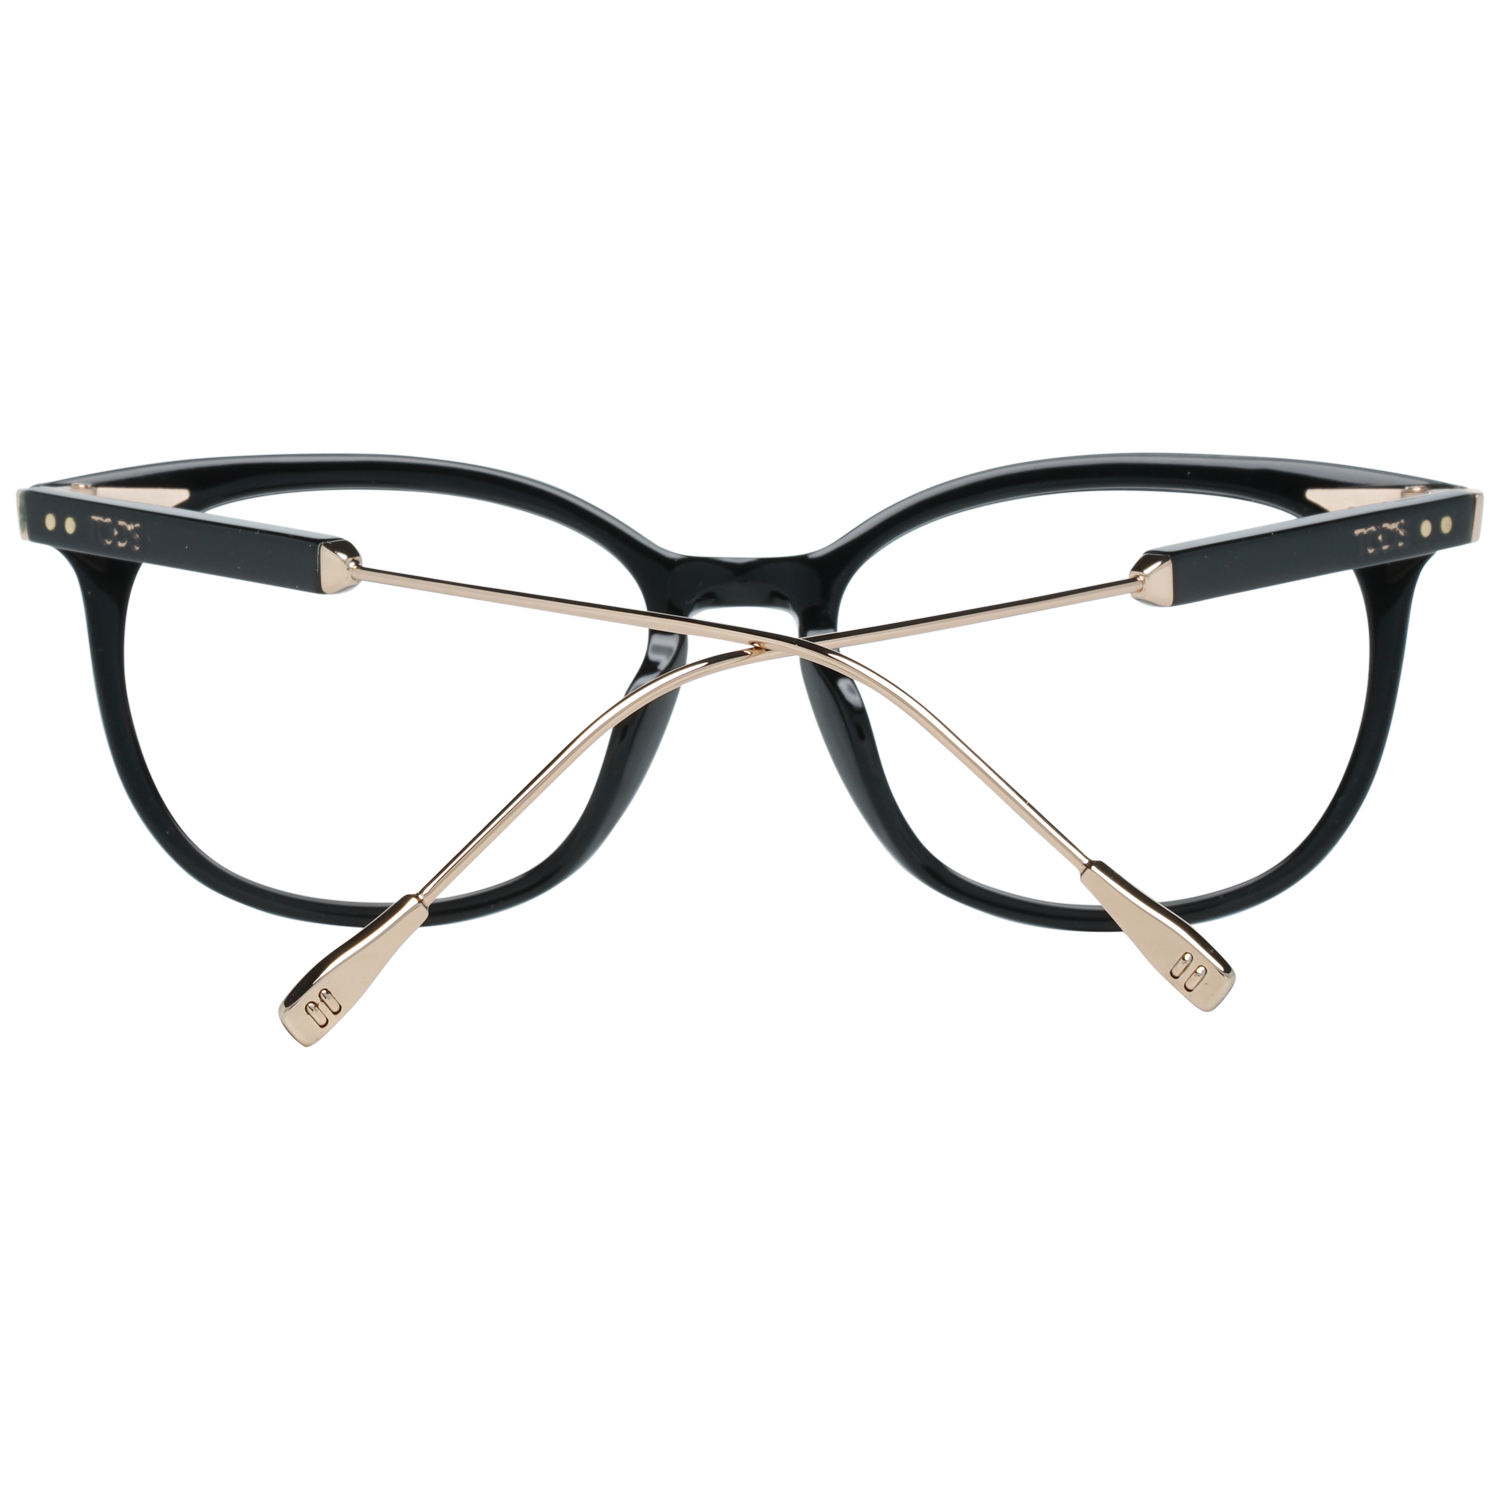 Tods Optical Frame TO5202 001 52 Women
Frame color: Black
Size: 52-16-145
Lenses width: 52
Lenses heigth: 46
Bridge length: 16
Frame width: 137
Temple length: 145
Shipment includes: Case, Cleaning cloth
Style: Full-Rim
Spring hinge: No